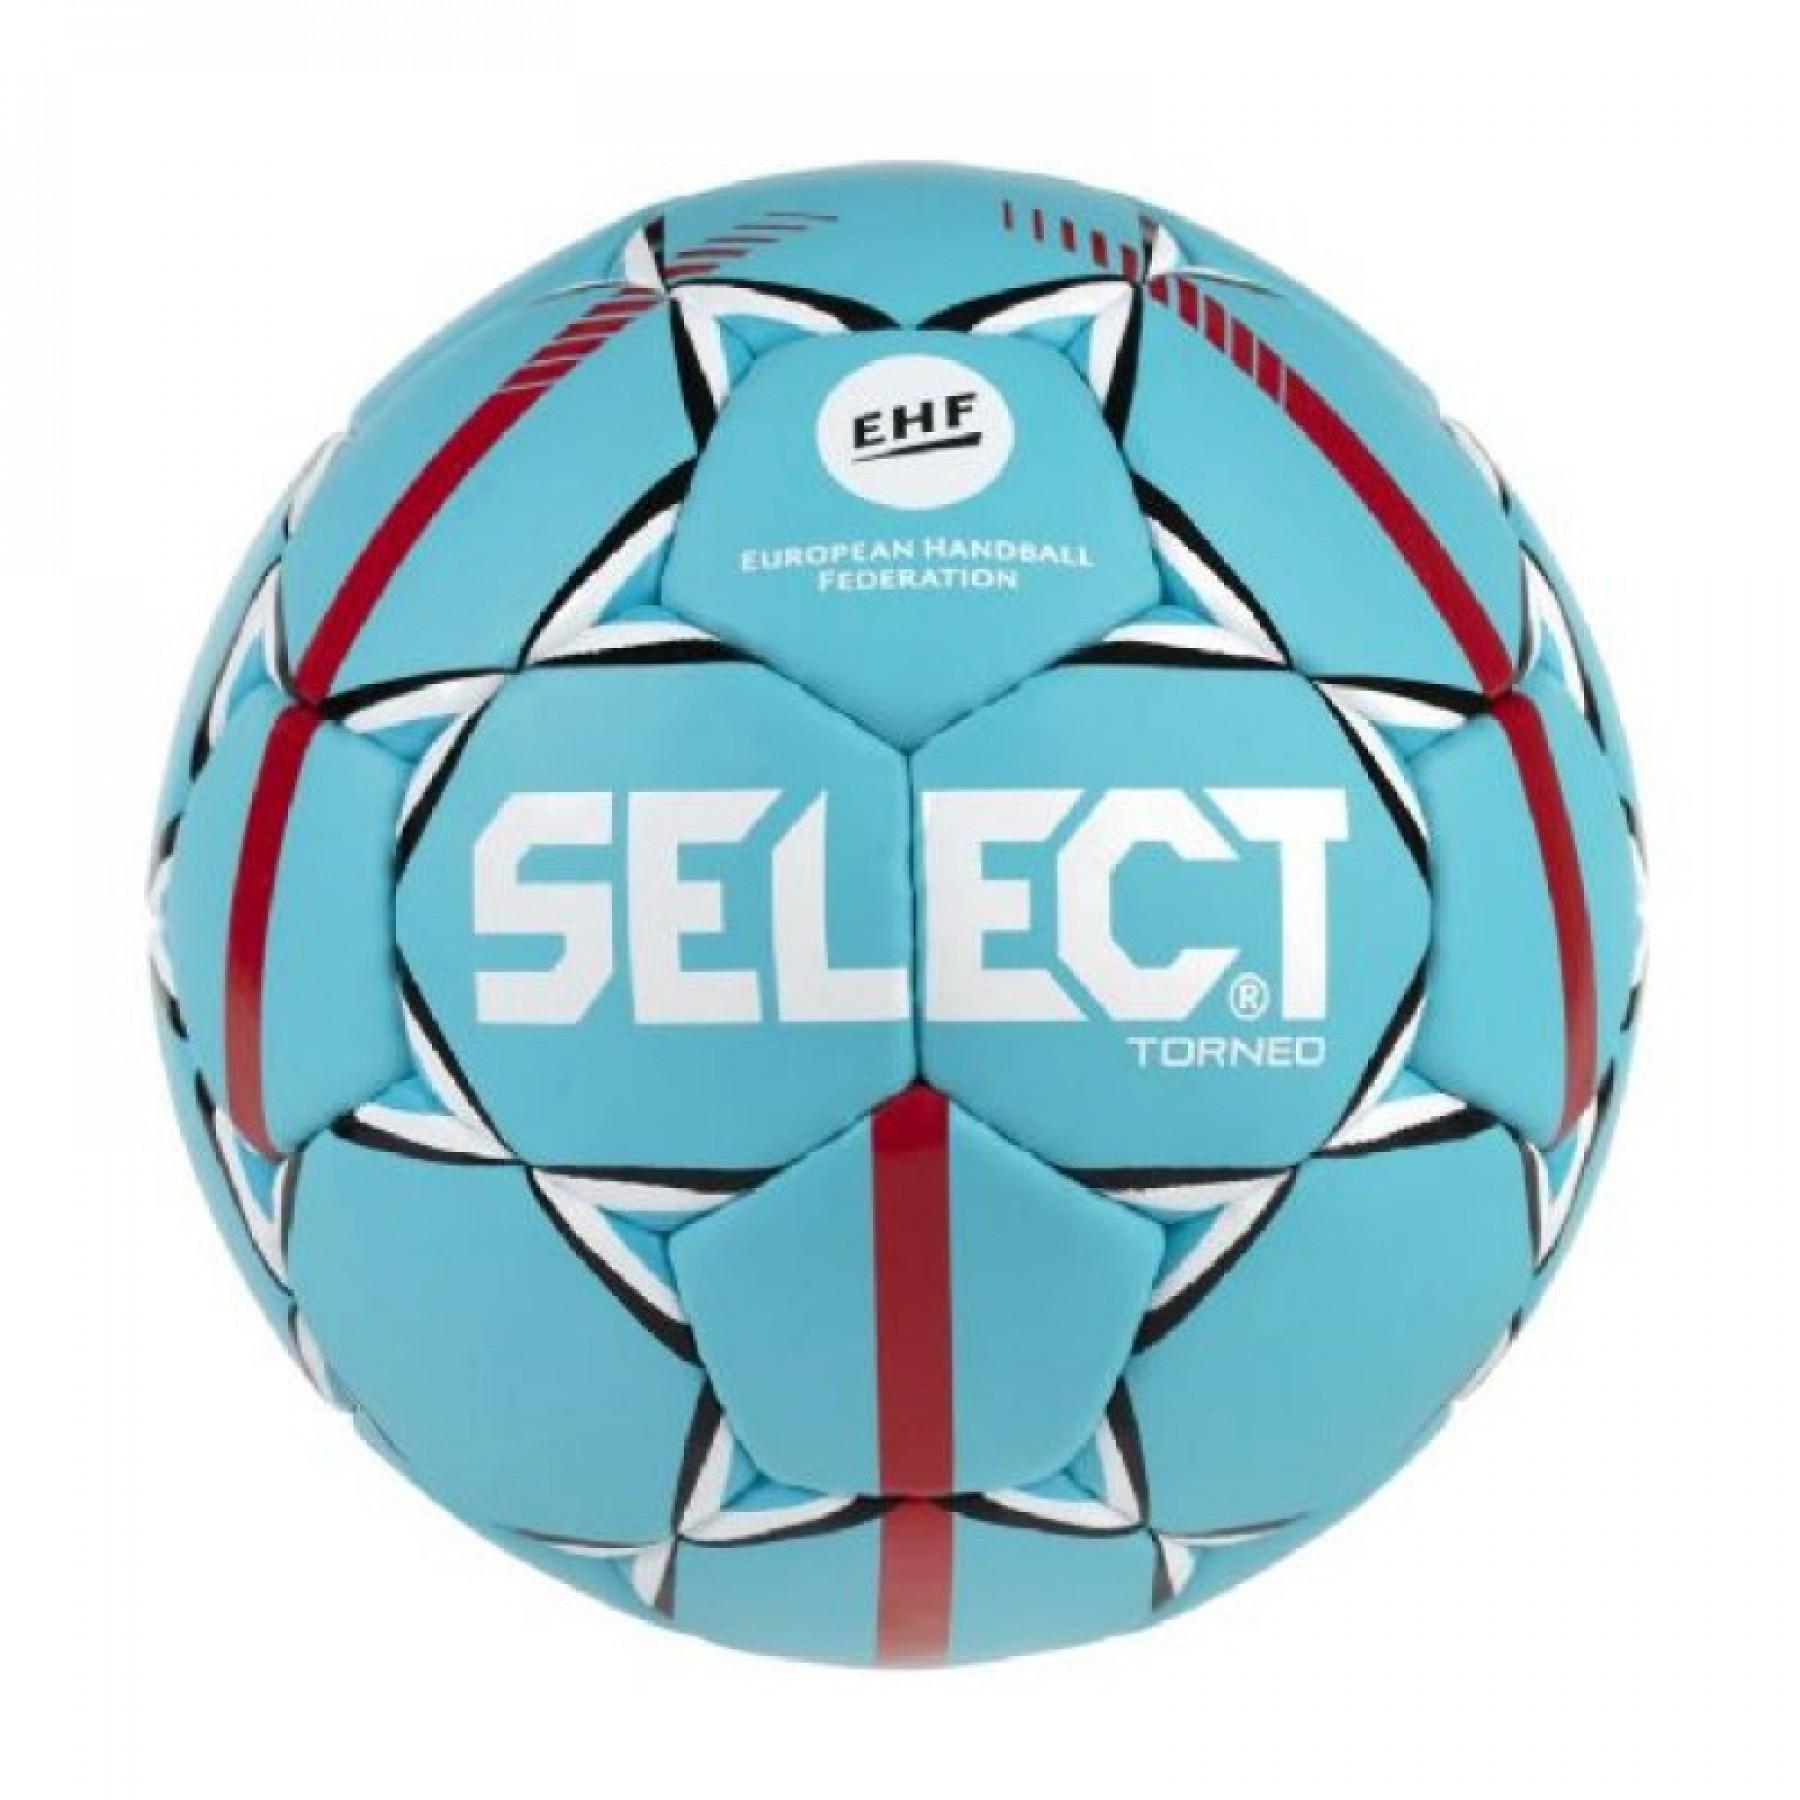 Packung mit 10 Luftballons Select HB Torneo Official EHF